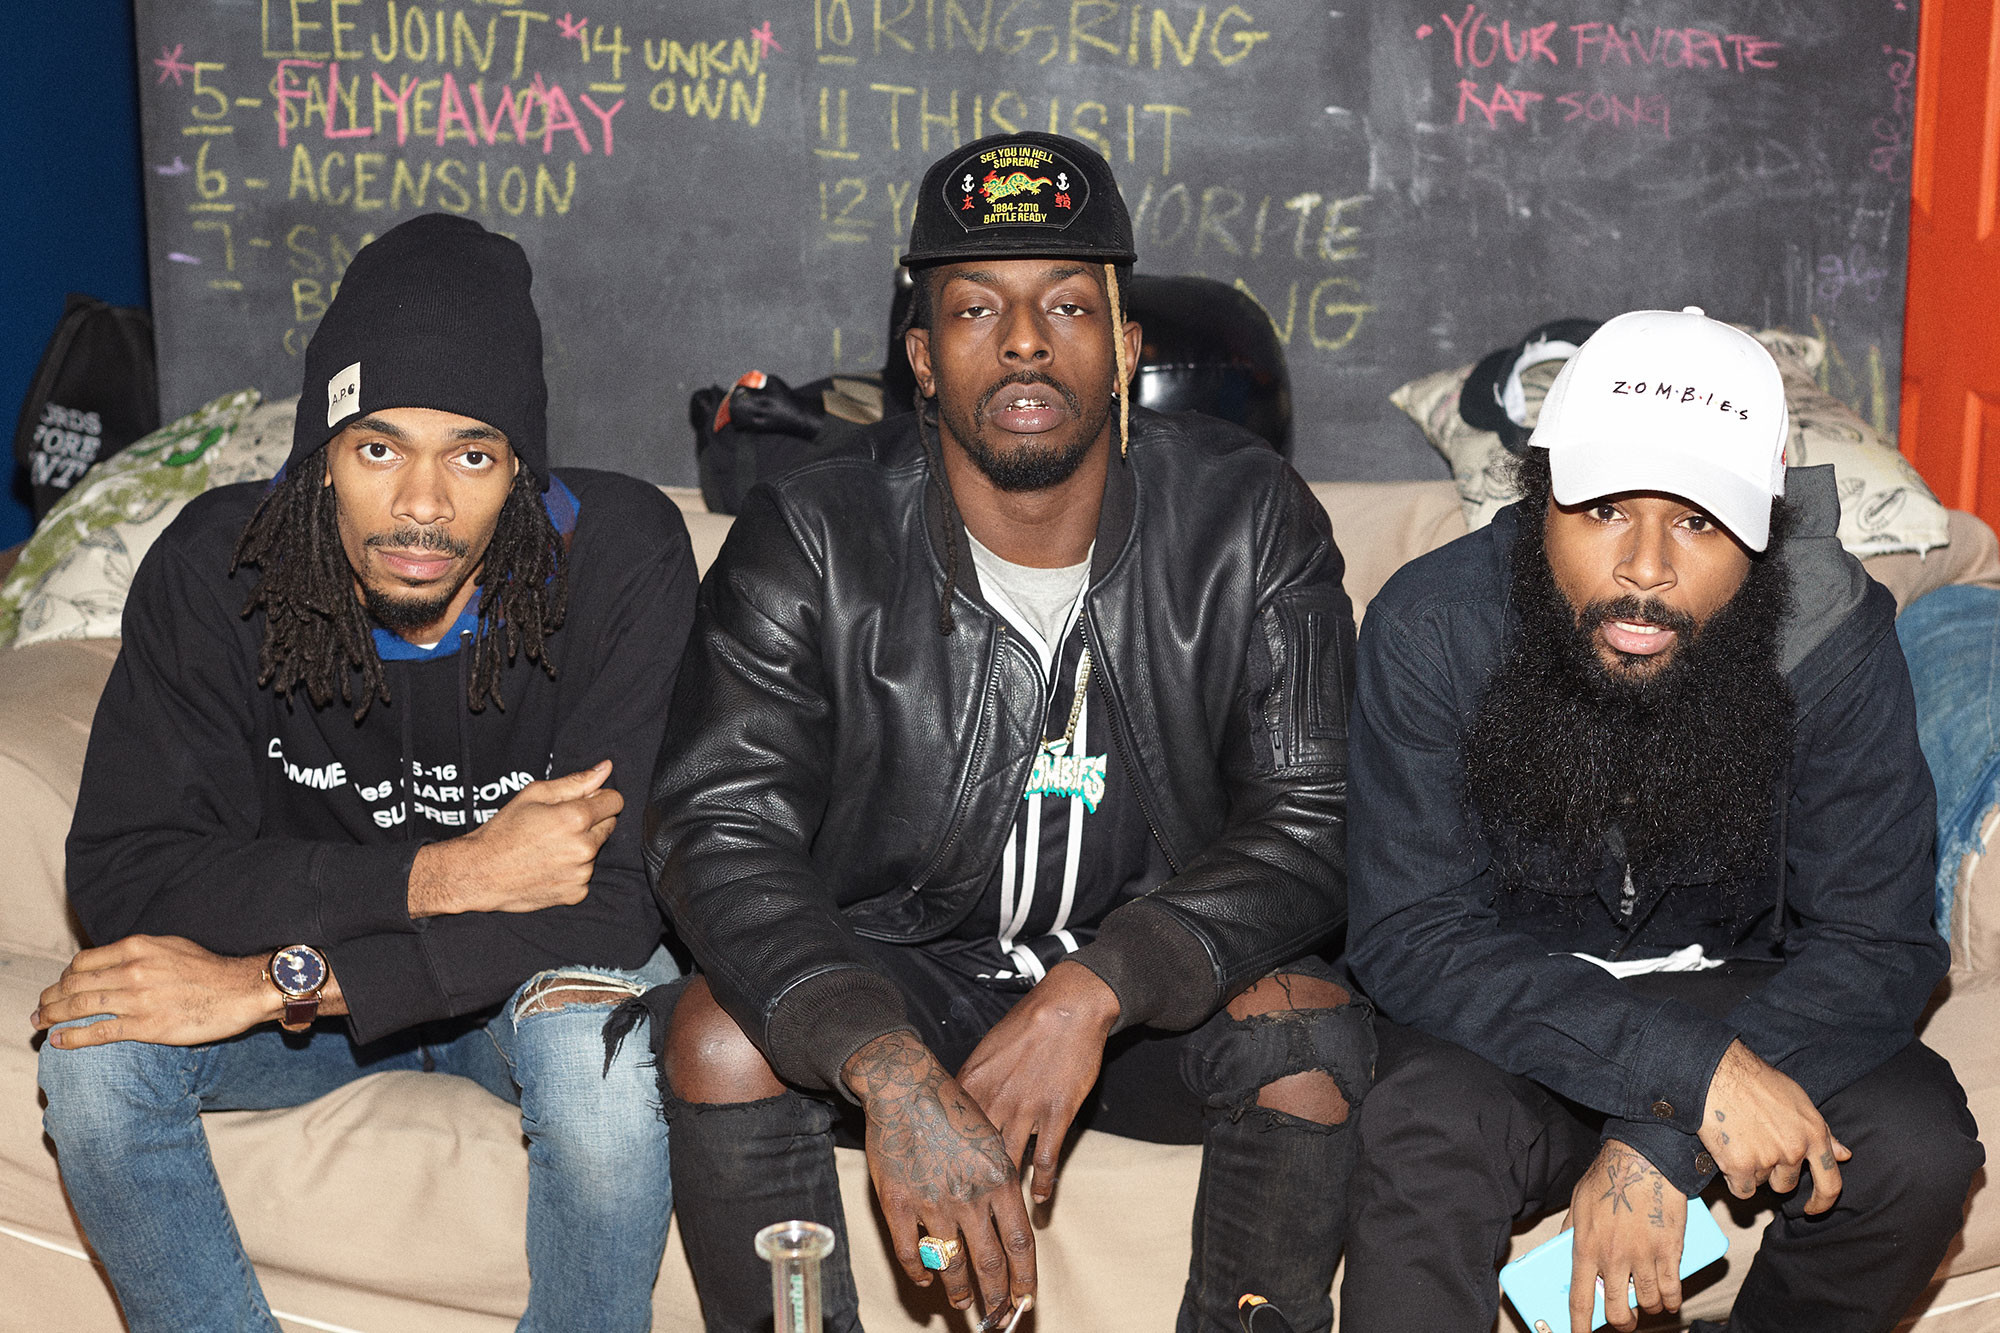 2000x1333 Meechy Darko, Erick “The Architect” Elliott and Juice make up the  Brooklyn-born rap trio The Flatbush Zombies. The name stems from an early,  somewhat devout ...